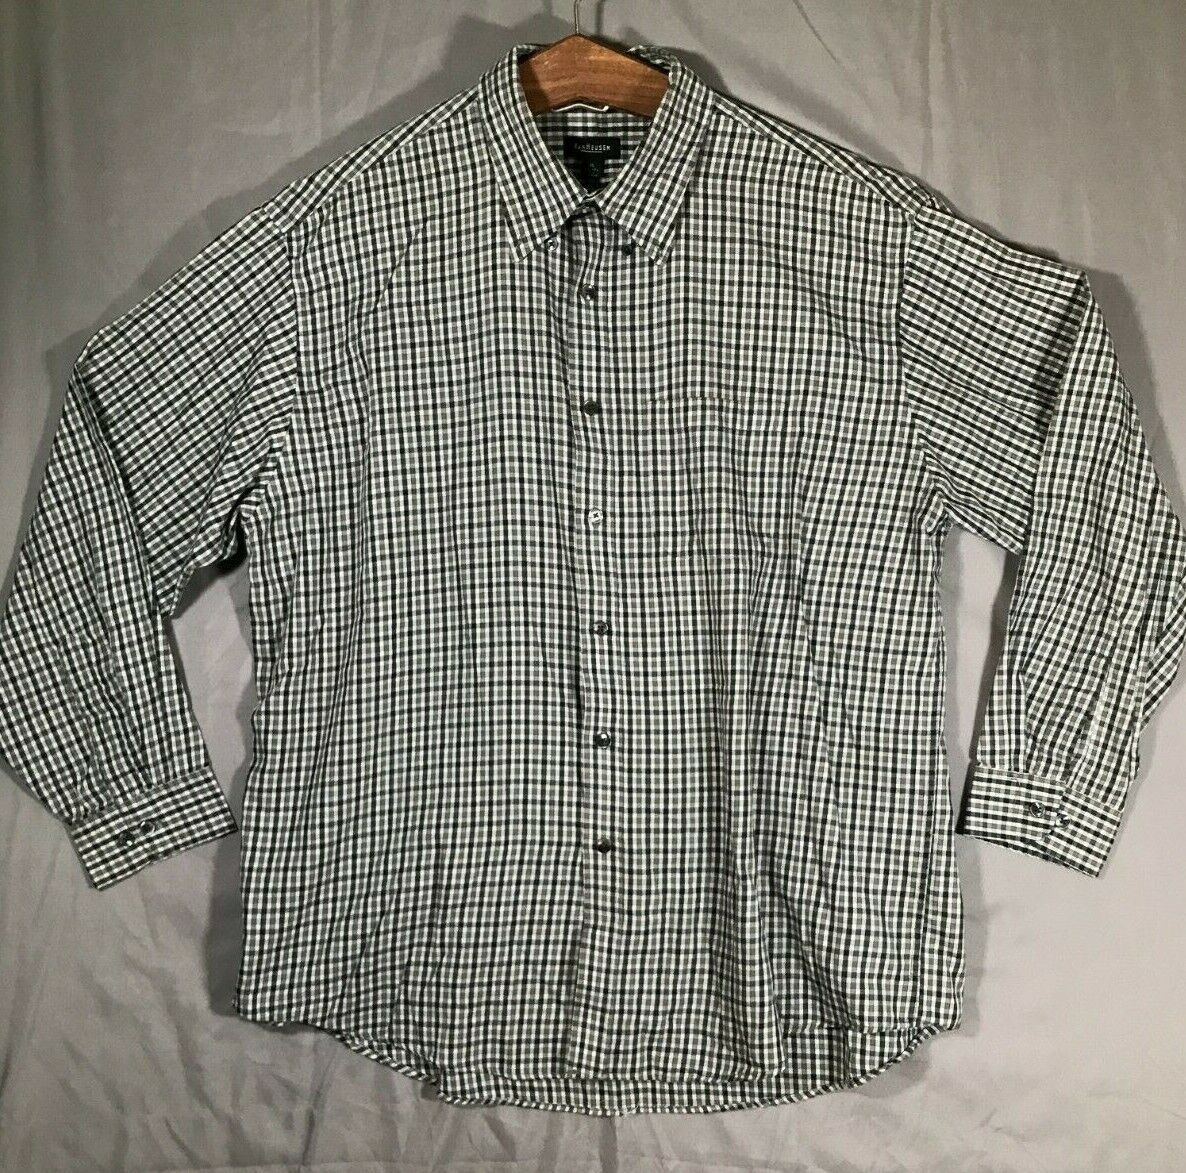 Primary image for Van Heusen XL Extra Large Men's Casual Button Up Pocket Shirt Multicolor Checker